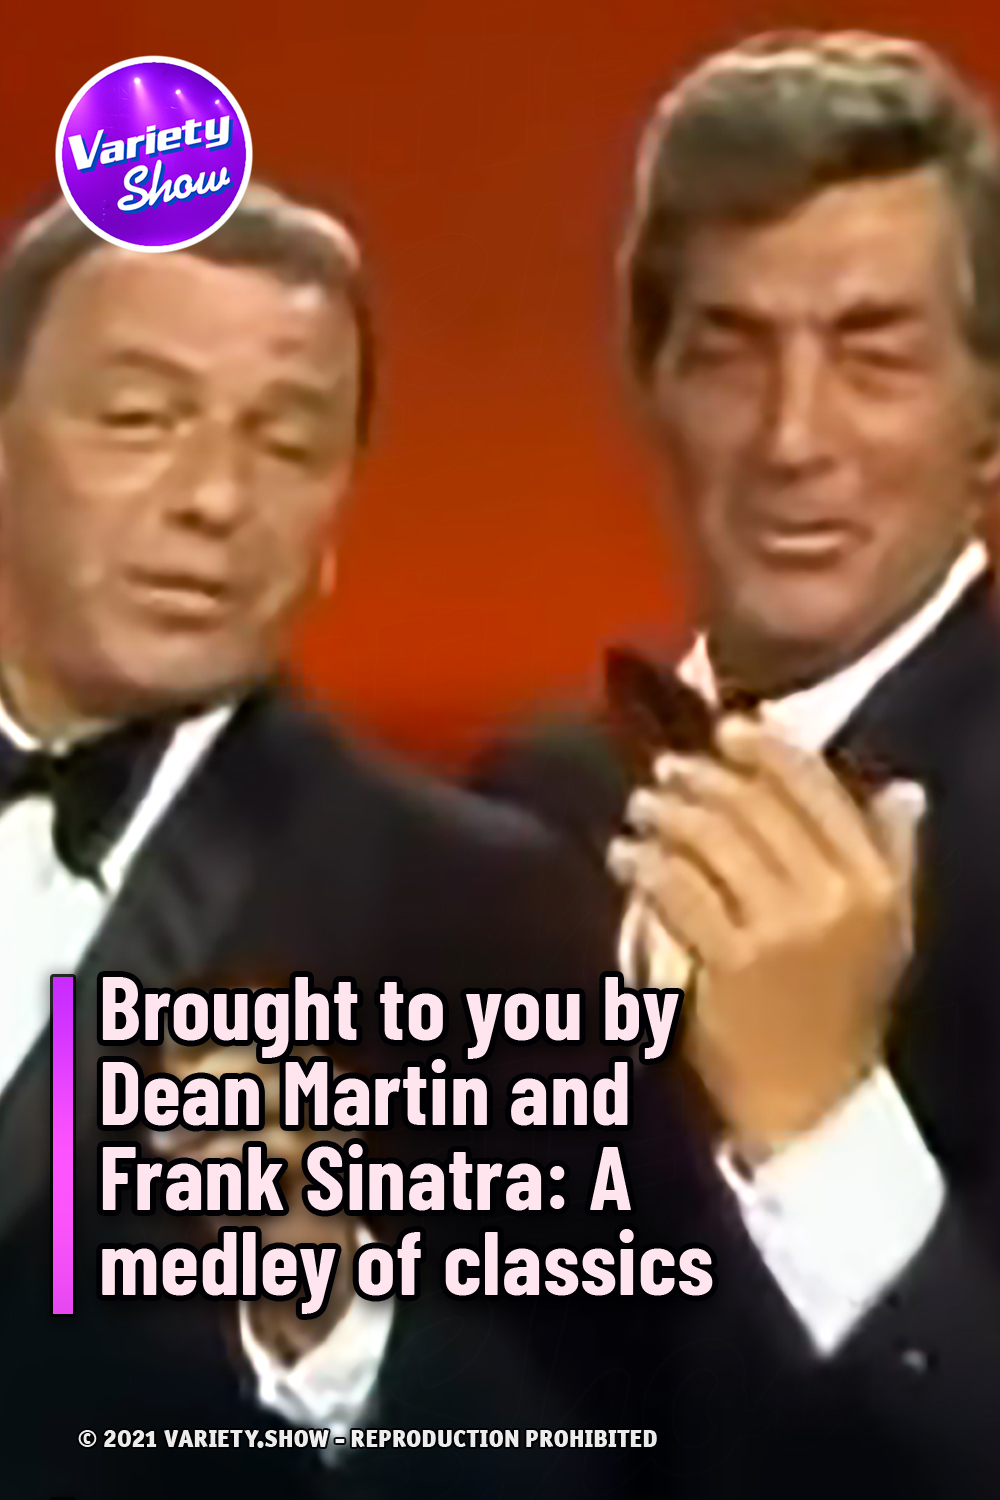 Brought to you by Dean Martin and Frank Sinatra: A medley of classics